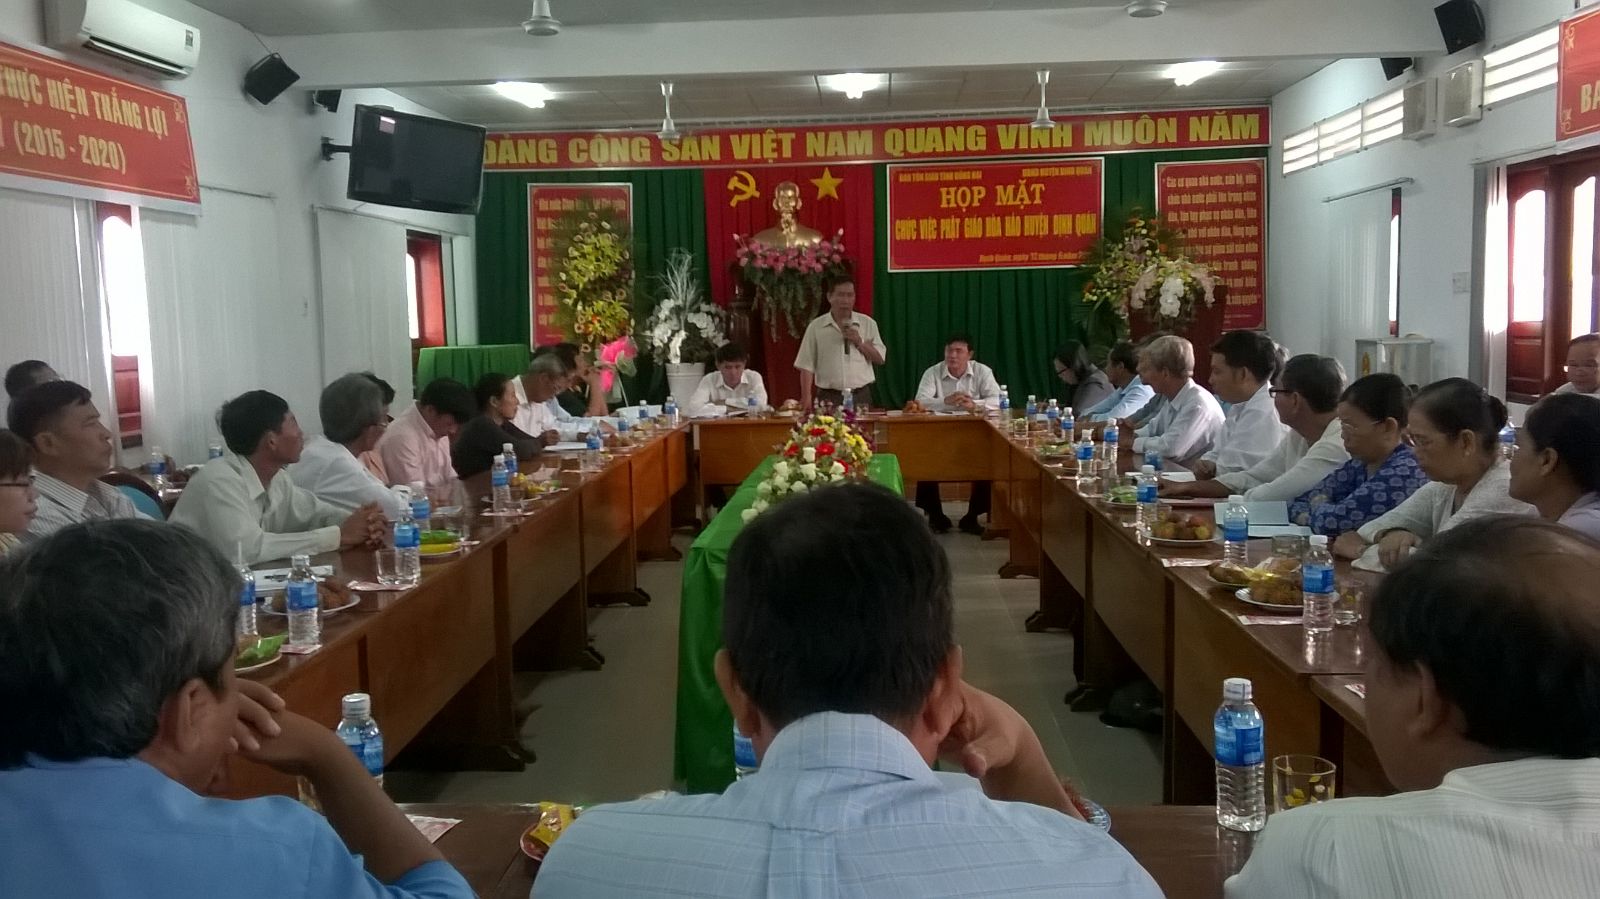 Dong Nai provincial Committee for Religious Affairs holds exchange meeting with Hoa Hao Buddhist deacons